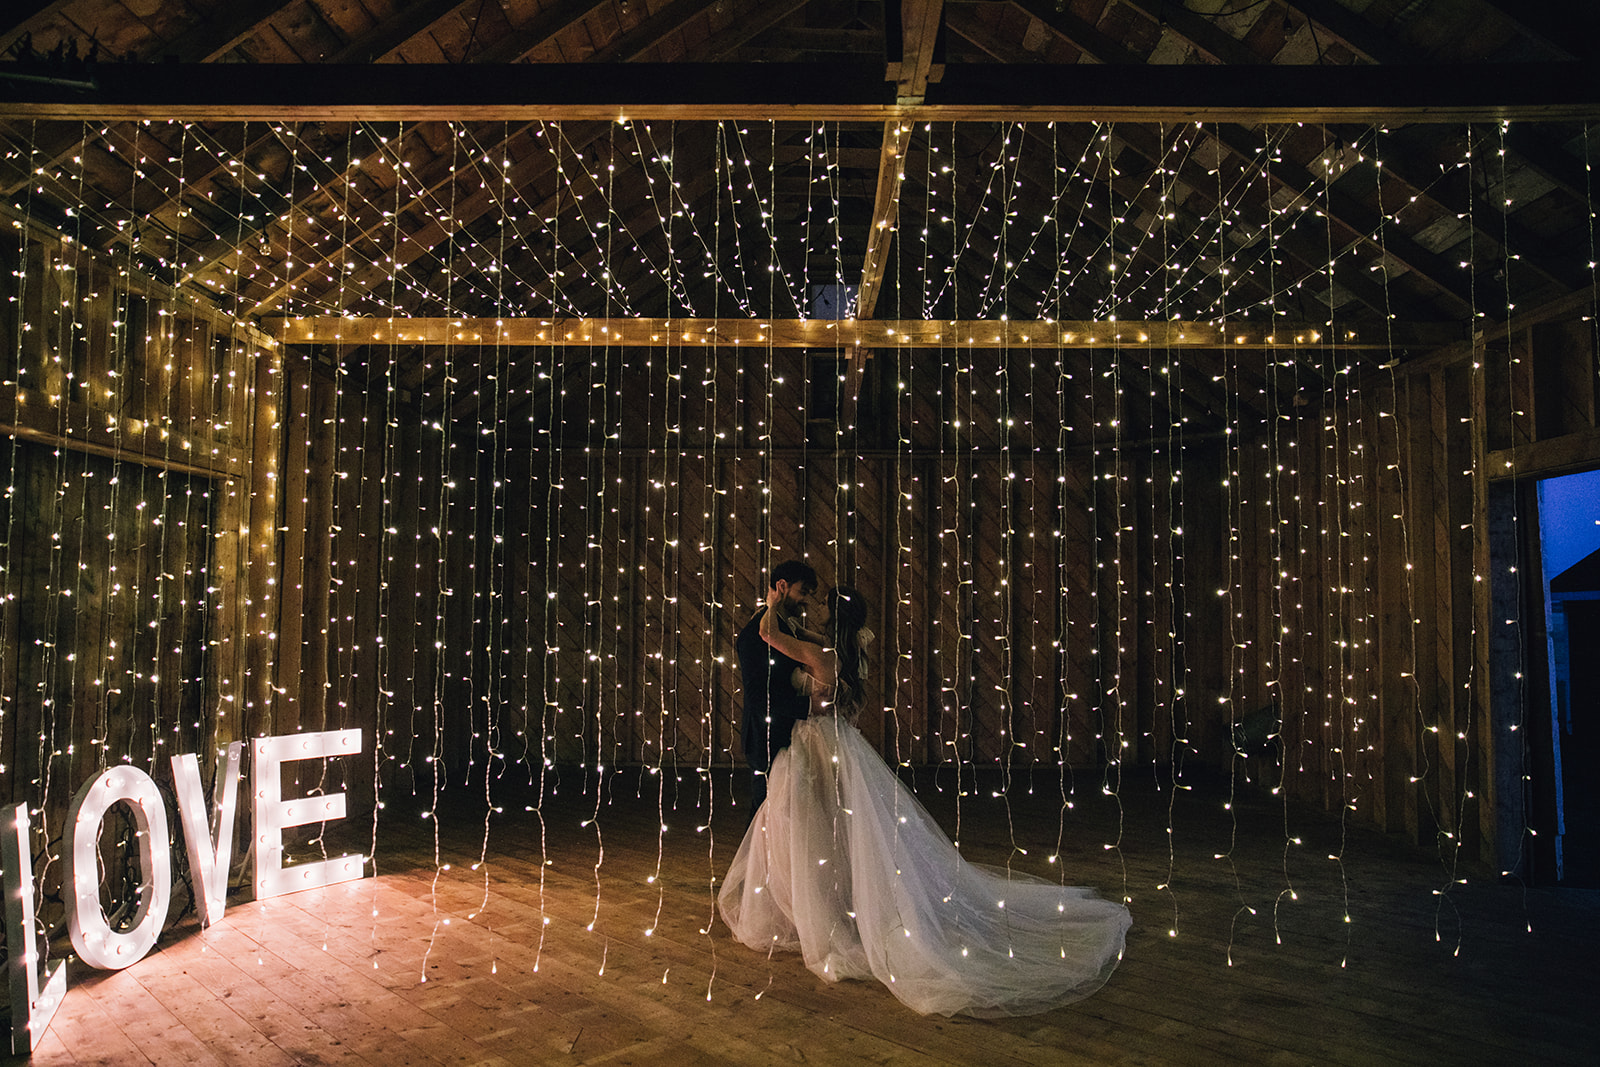 Romantic first dance in a barn with twinkle lights